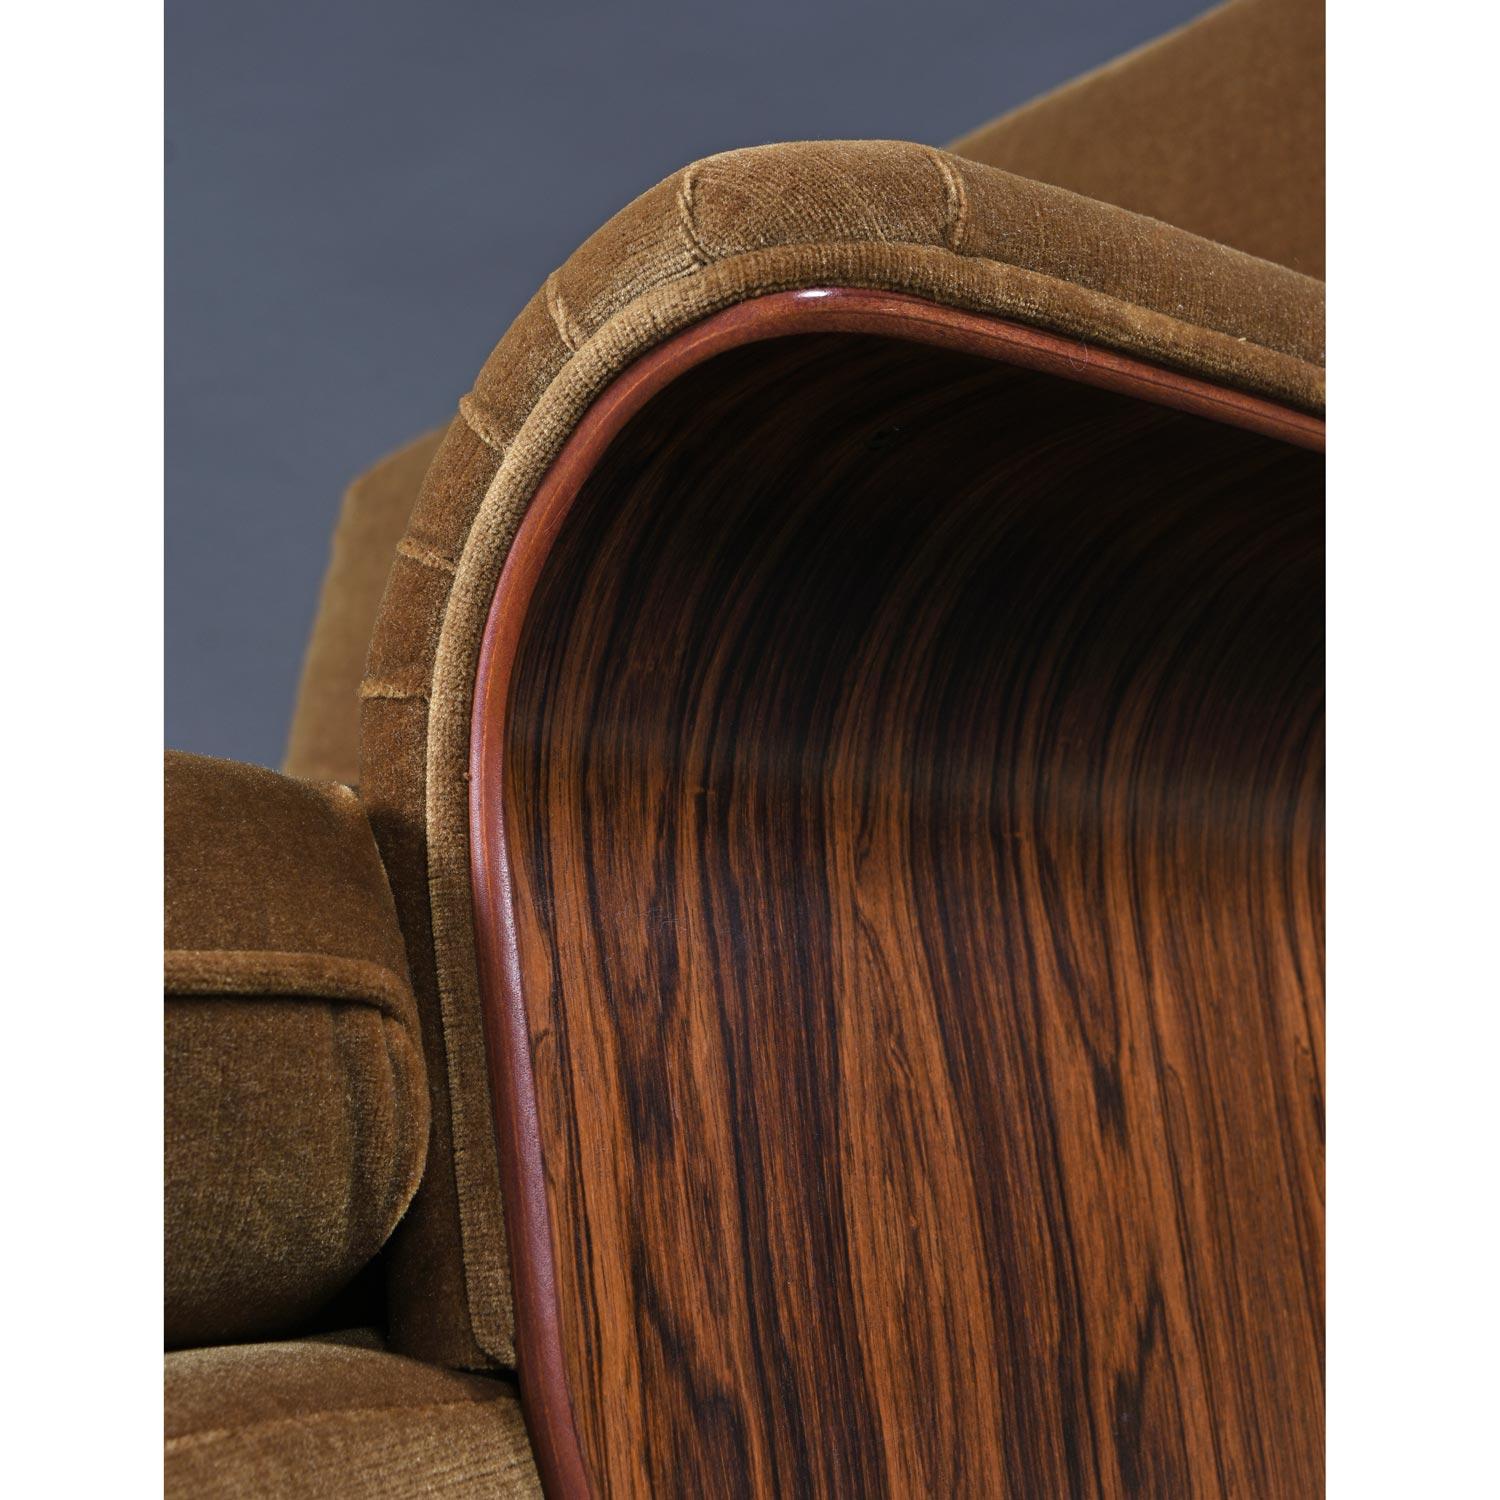 Tulip Seating Group in Rosewood by K M Wilkins for G-Plan of England 6